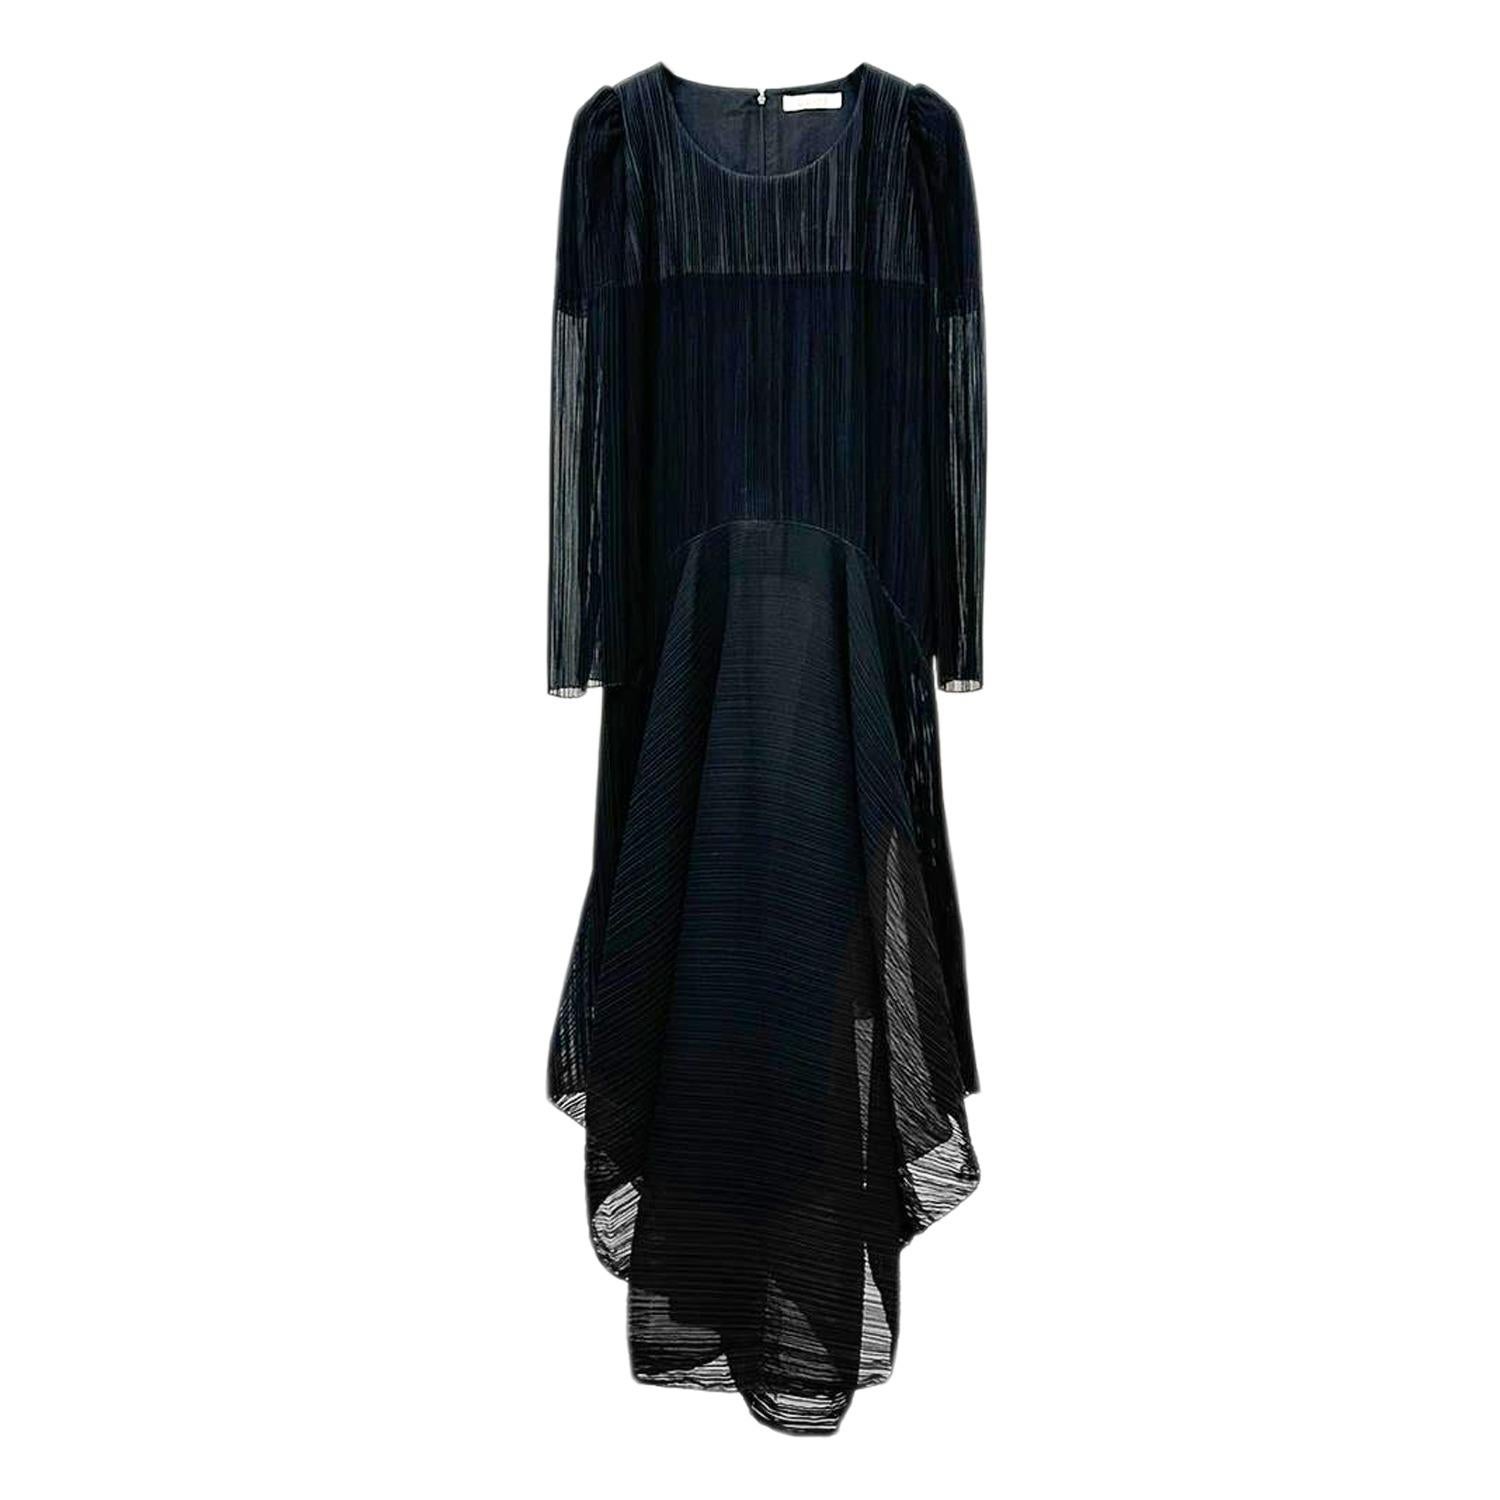 1980S KARL LAGERFELD CHLOE Black Pleated Chiffon Dress With Sleeves For Sale 2